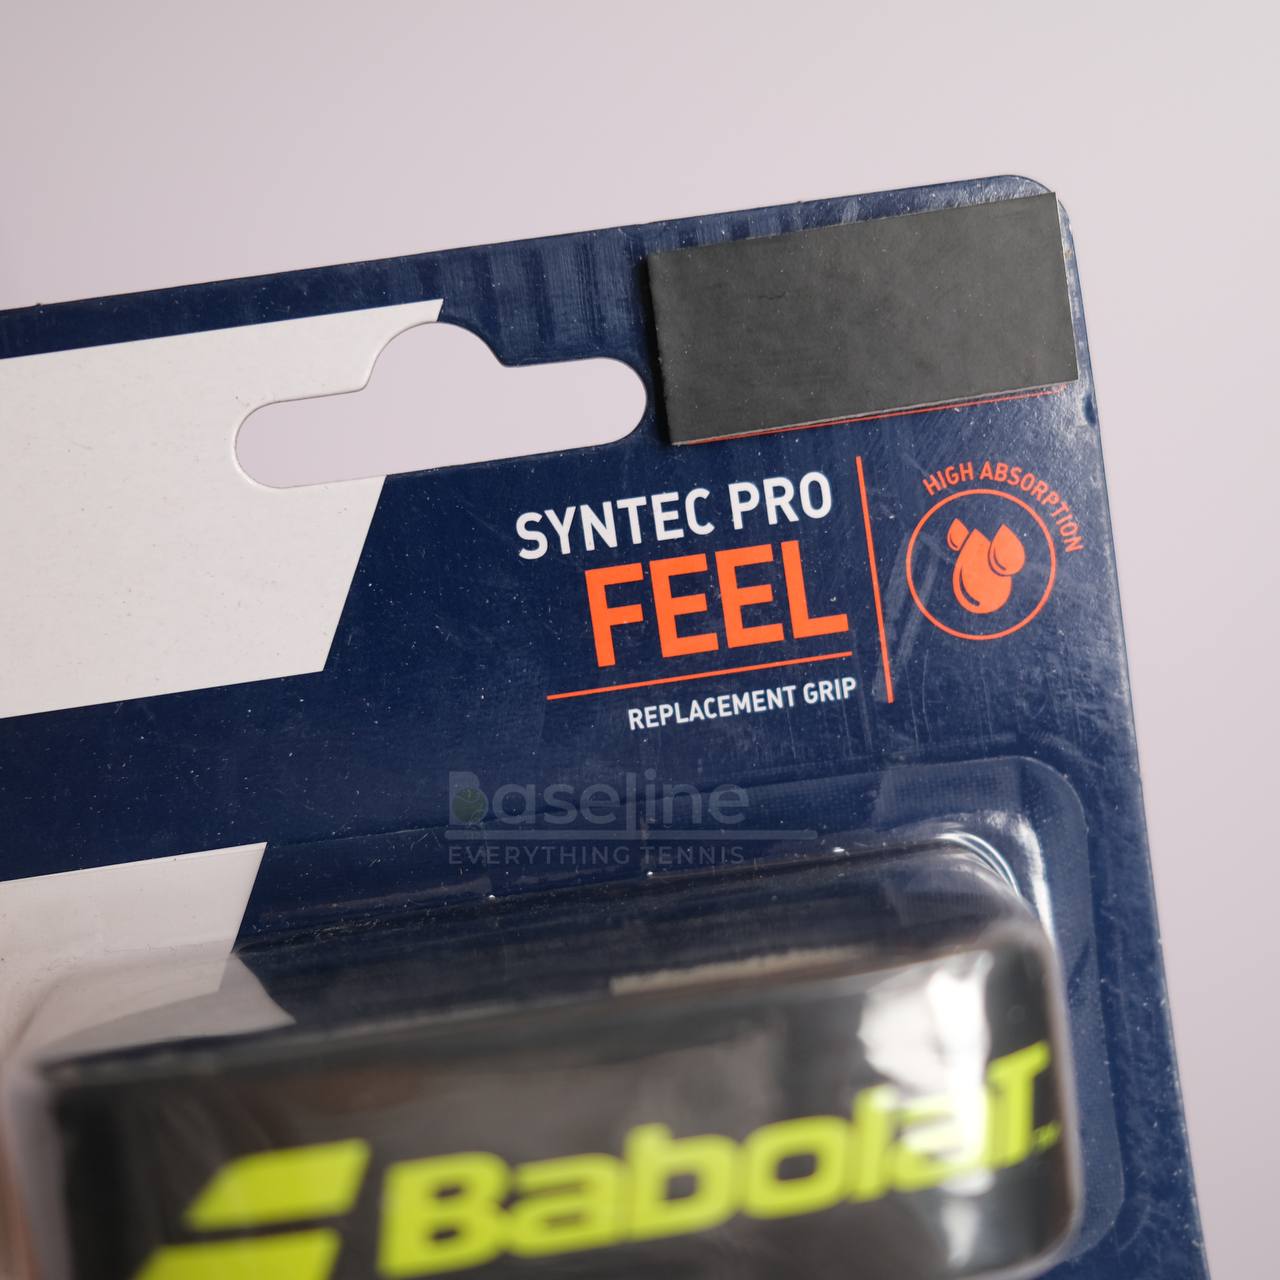 Babolat Syntec Pro Feel Replacement Grip